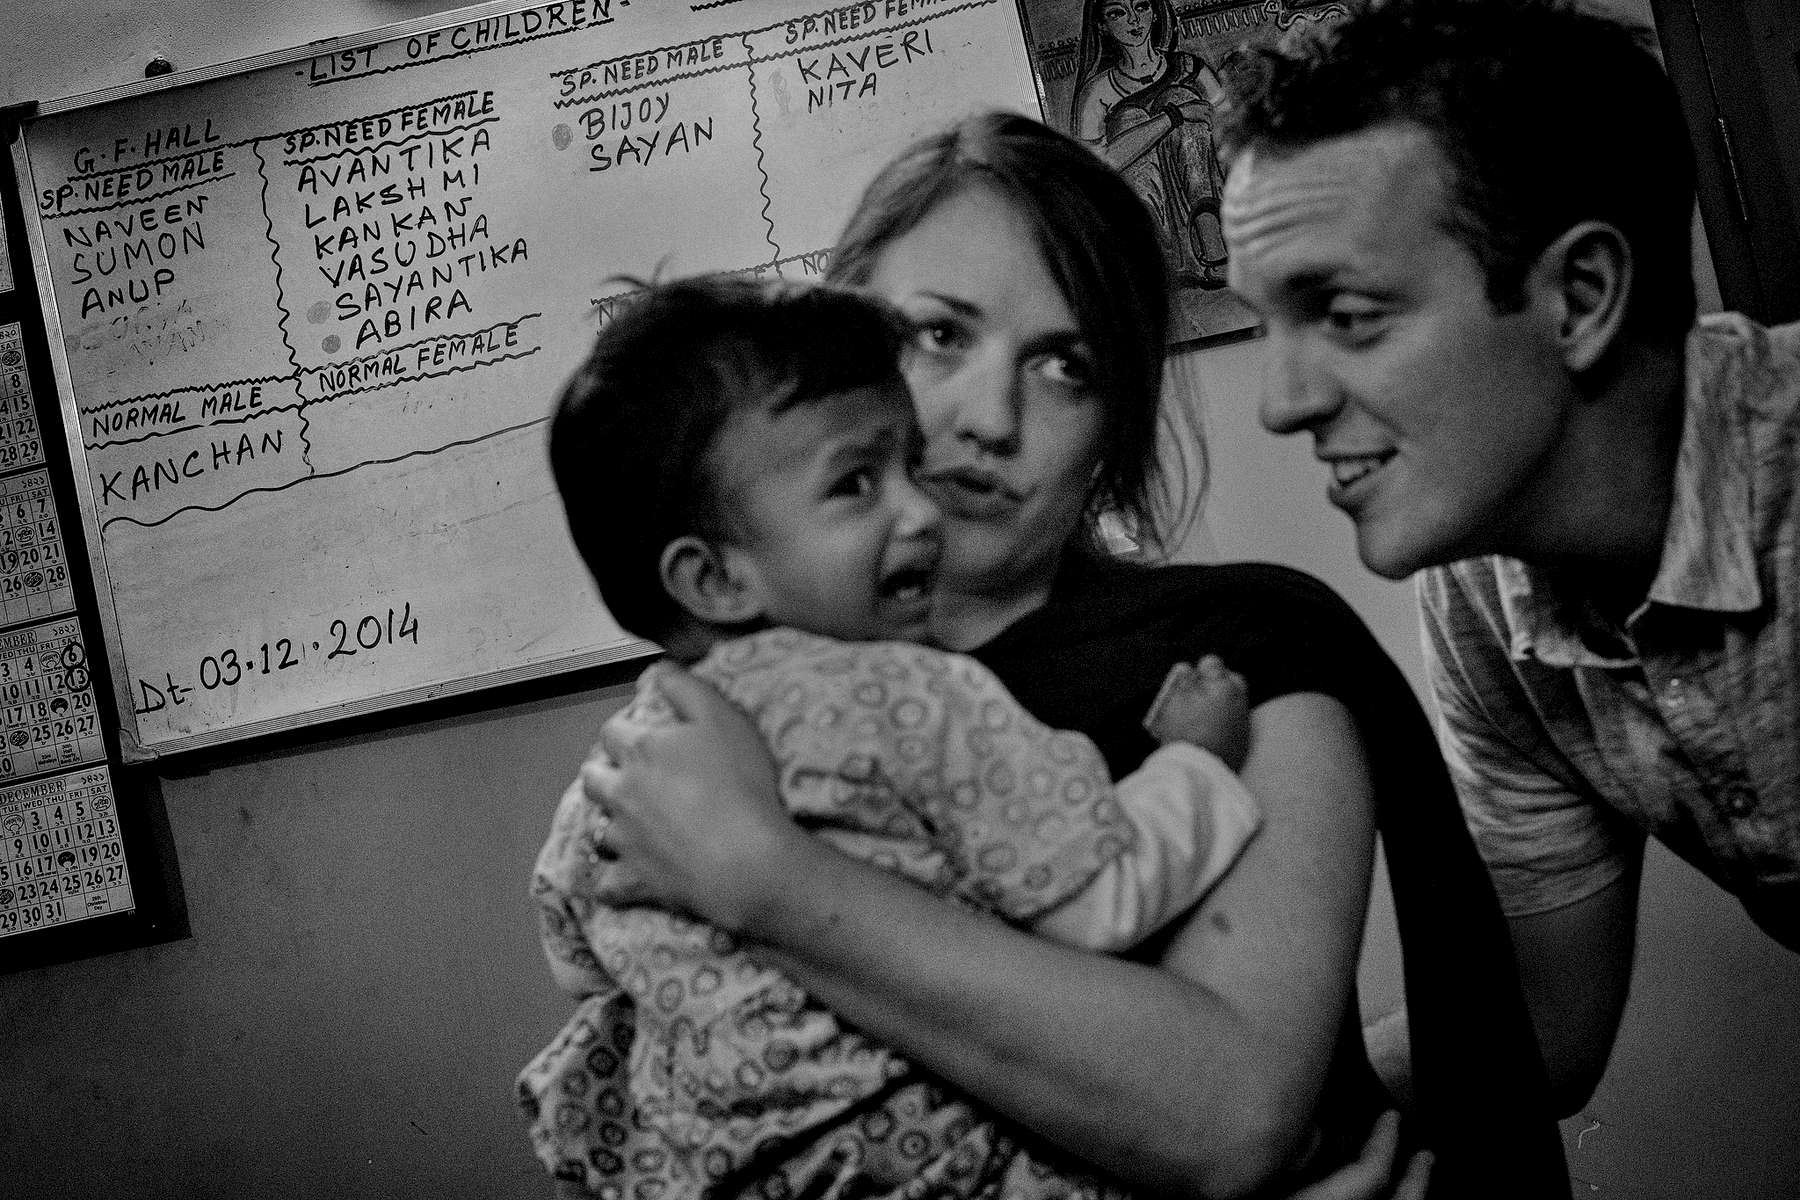 Jessica and Robby Followell pick up their daughter Eden Kaveri at the orphanage in Kolkata, India. 